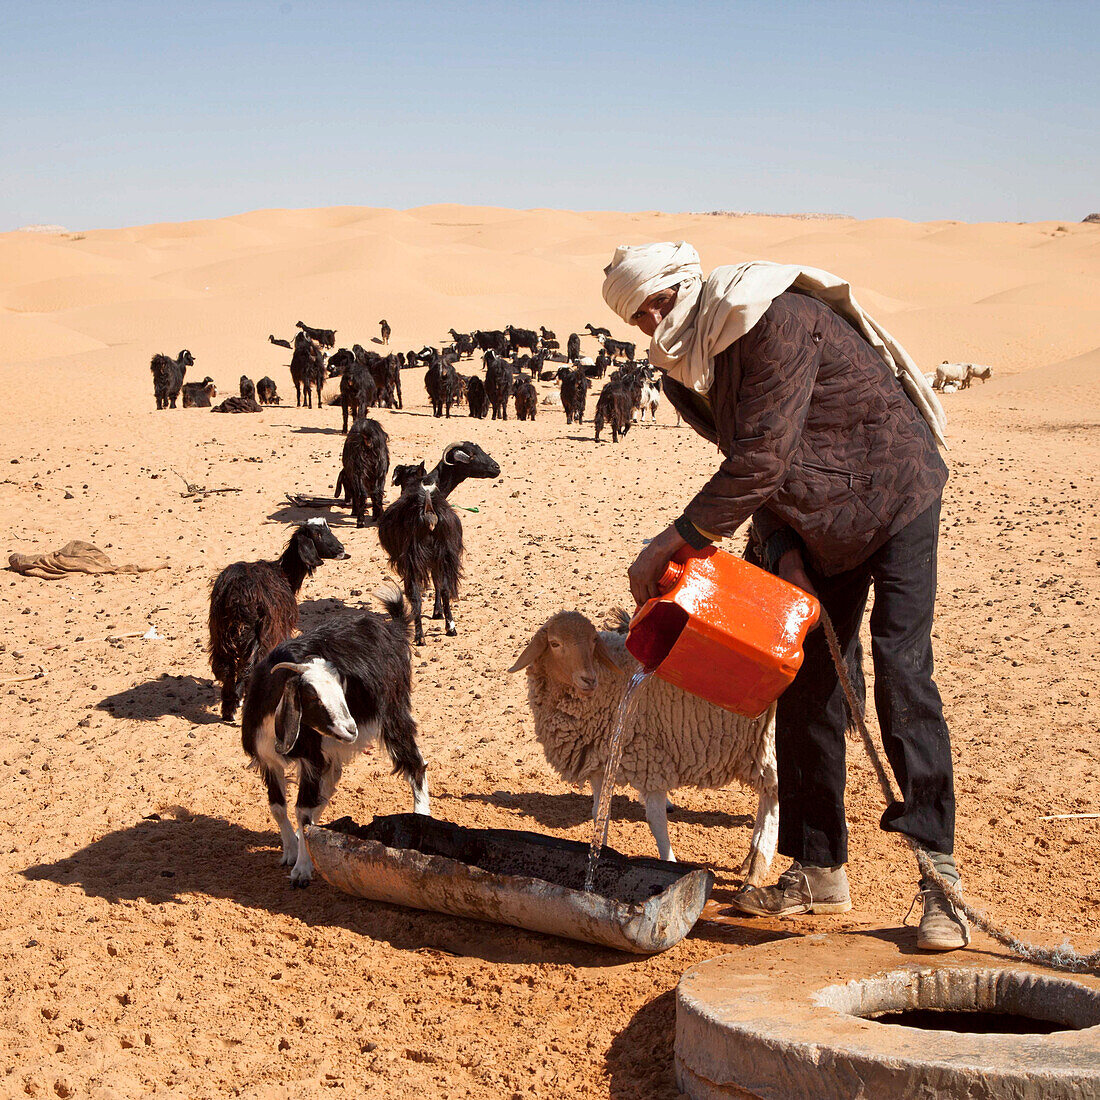 Farmer giving water to cattle in the Sahara. Tunisia.